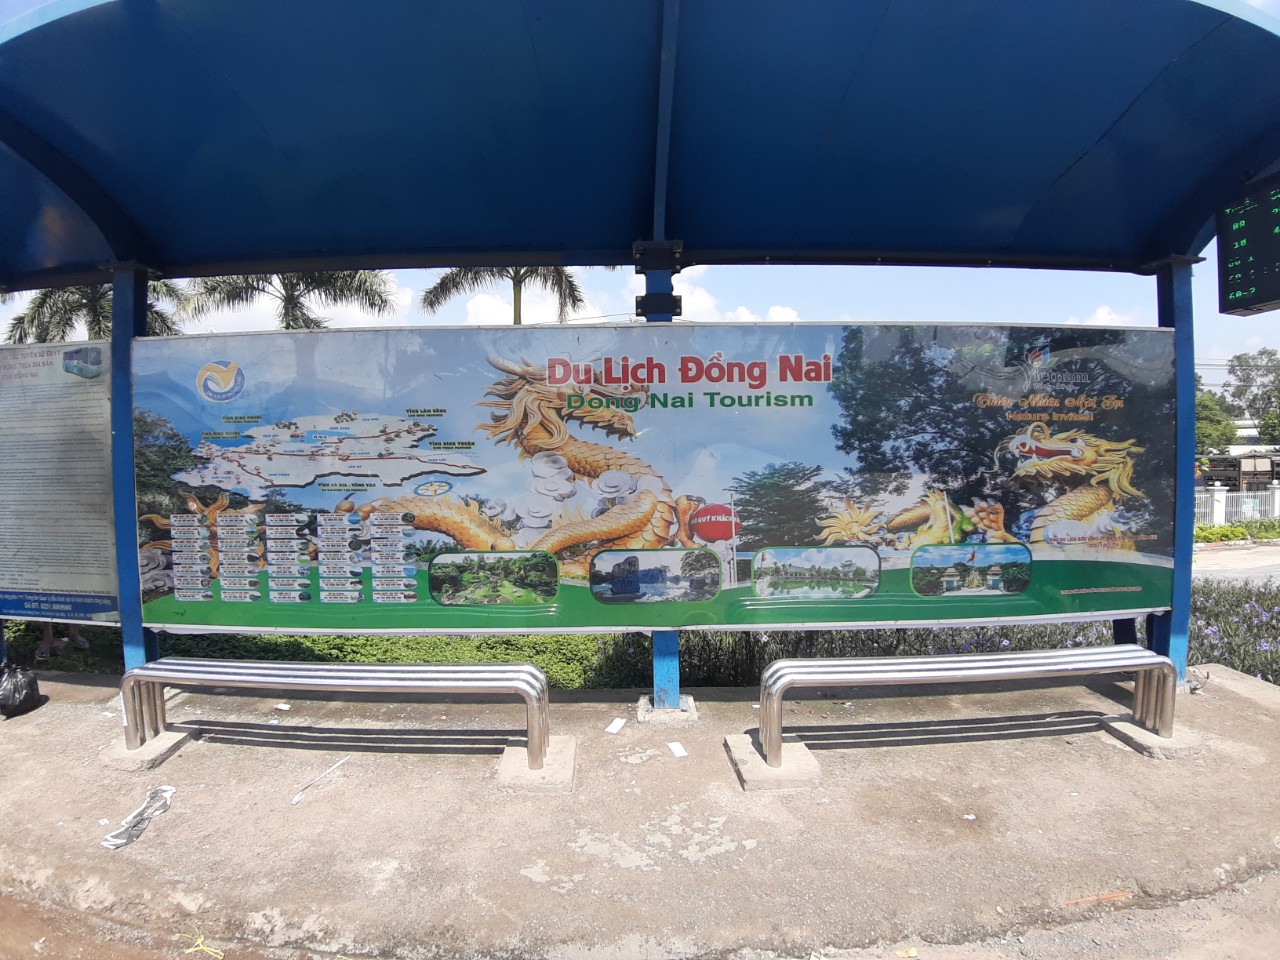 Promote Dong Nai tourism on the bus stop information board